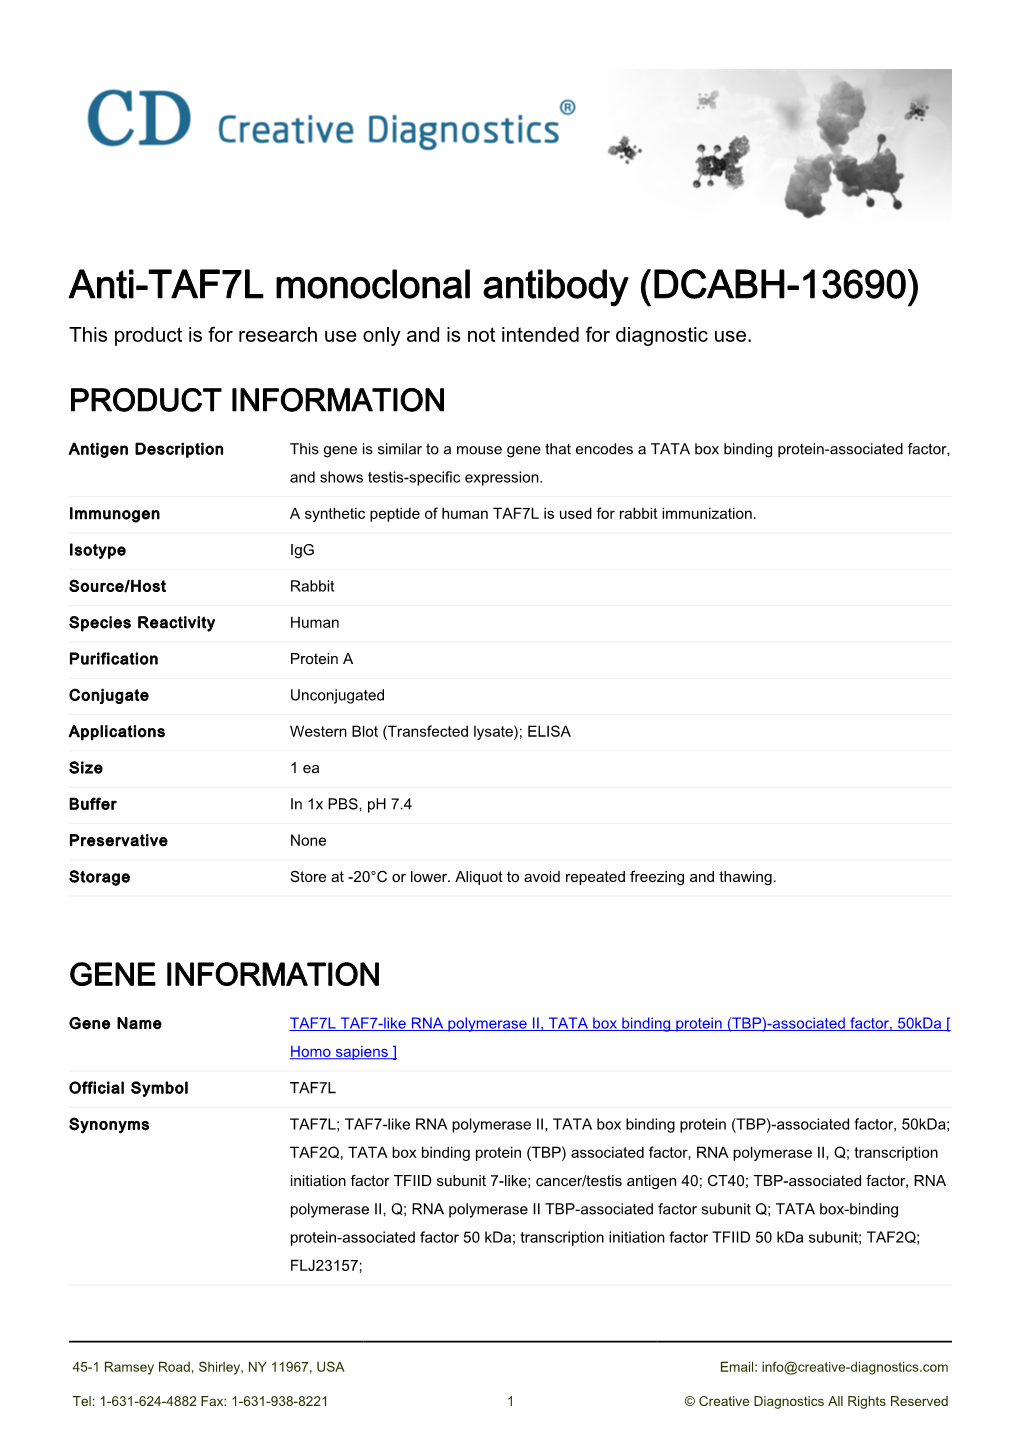 Anti-TAF7L Monoclonal Antibody (DCABH-13690) This Product Is for Research Use Only and Is Not Intended for Diagnostic Use